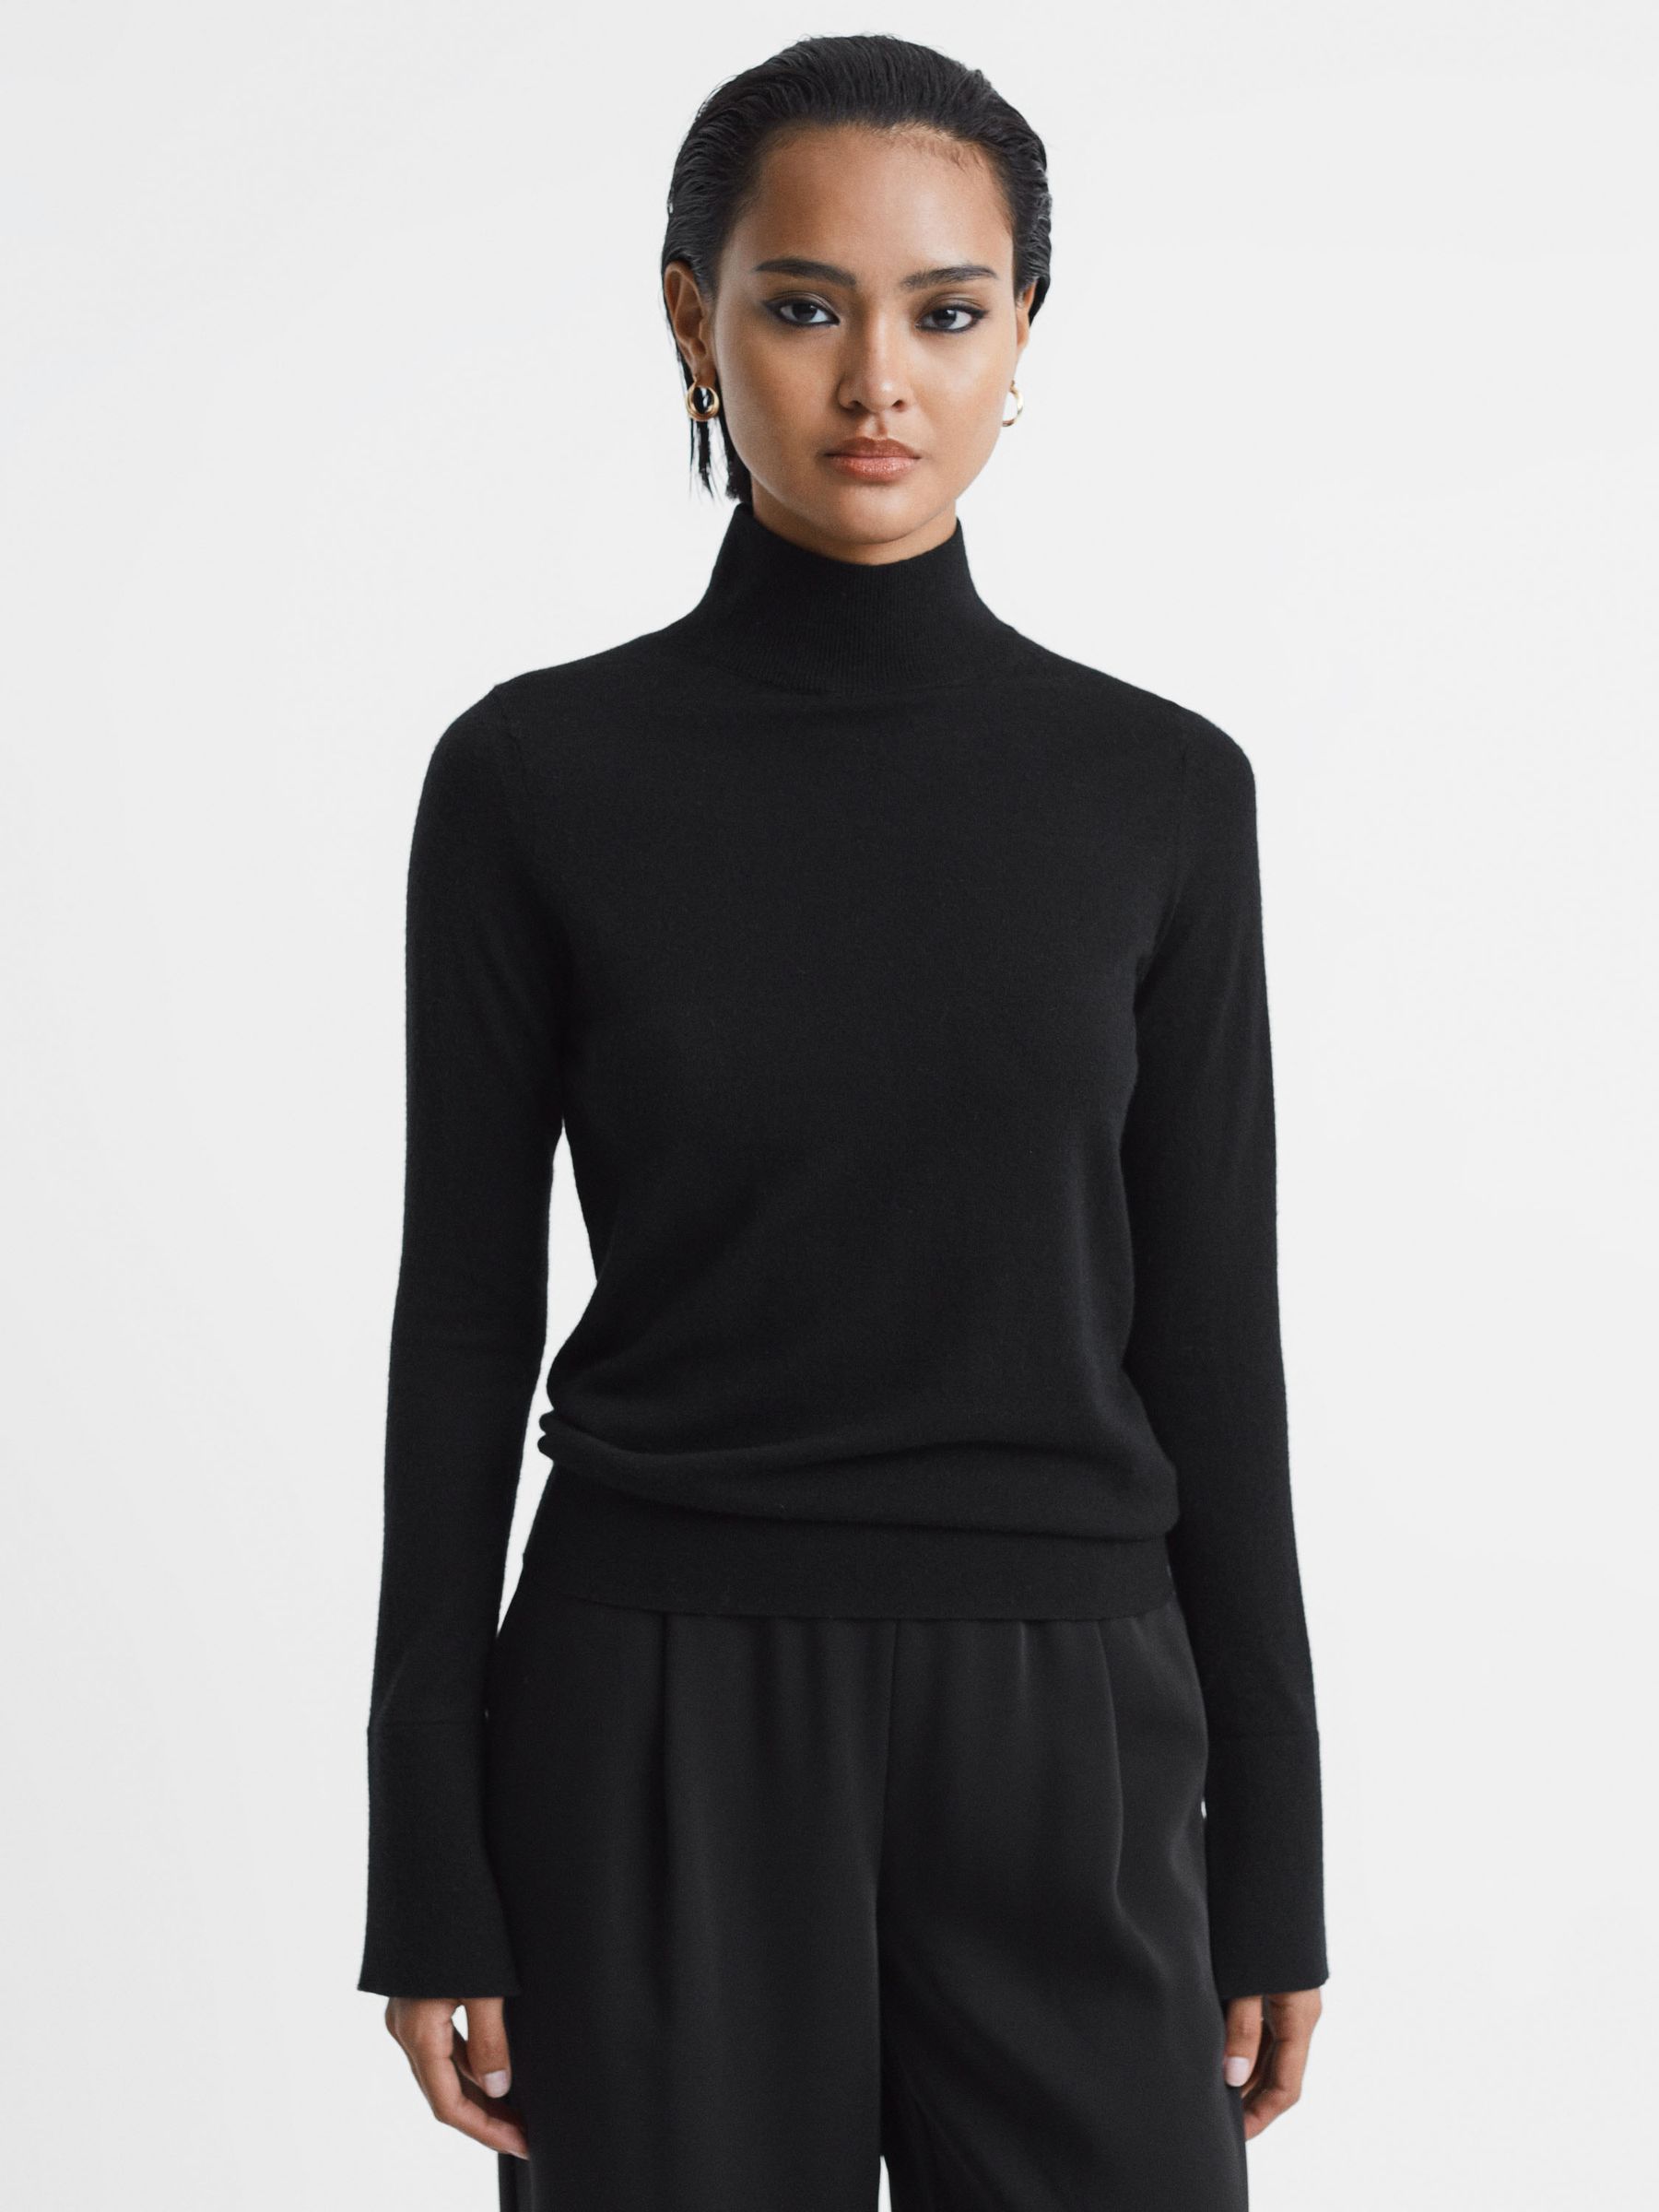 Reiss Kylie Merino Wool Fitted Funnel Neck Top - REISS